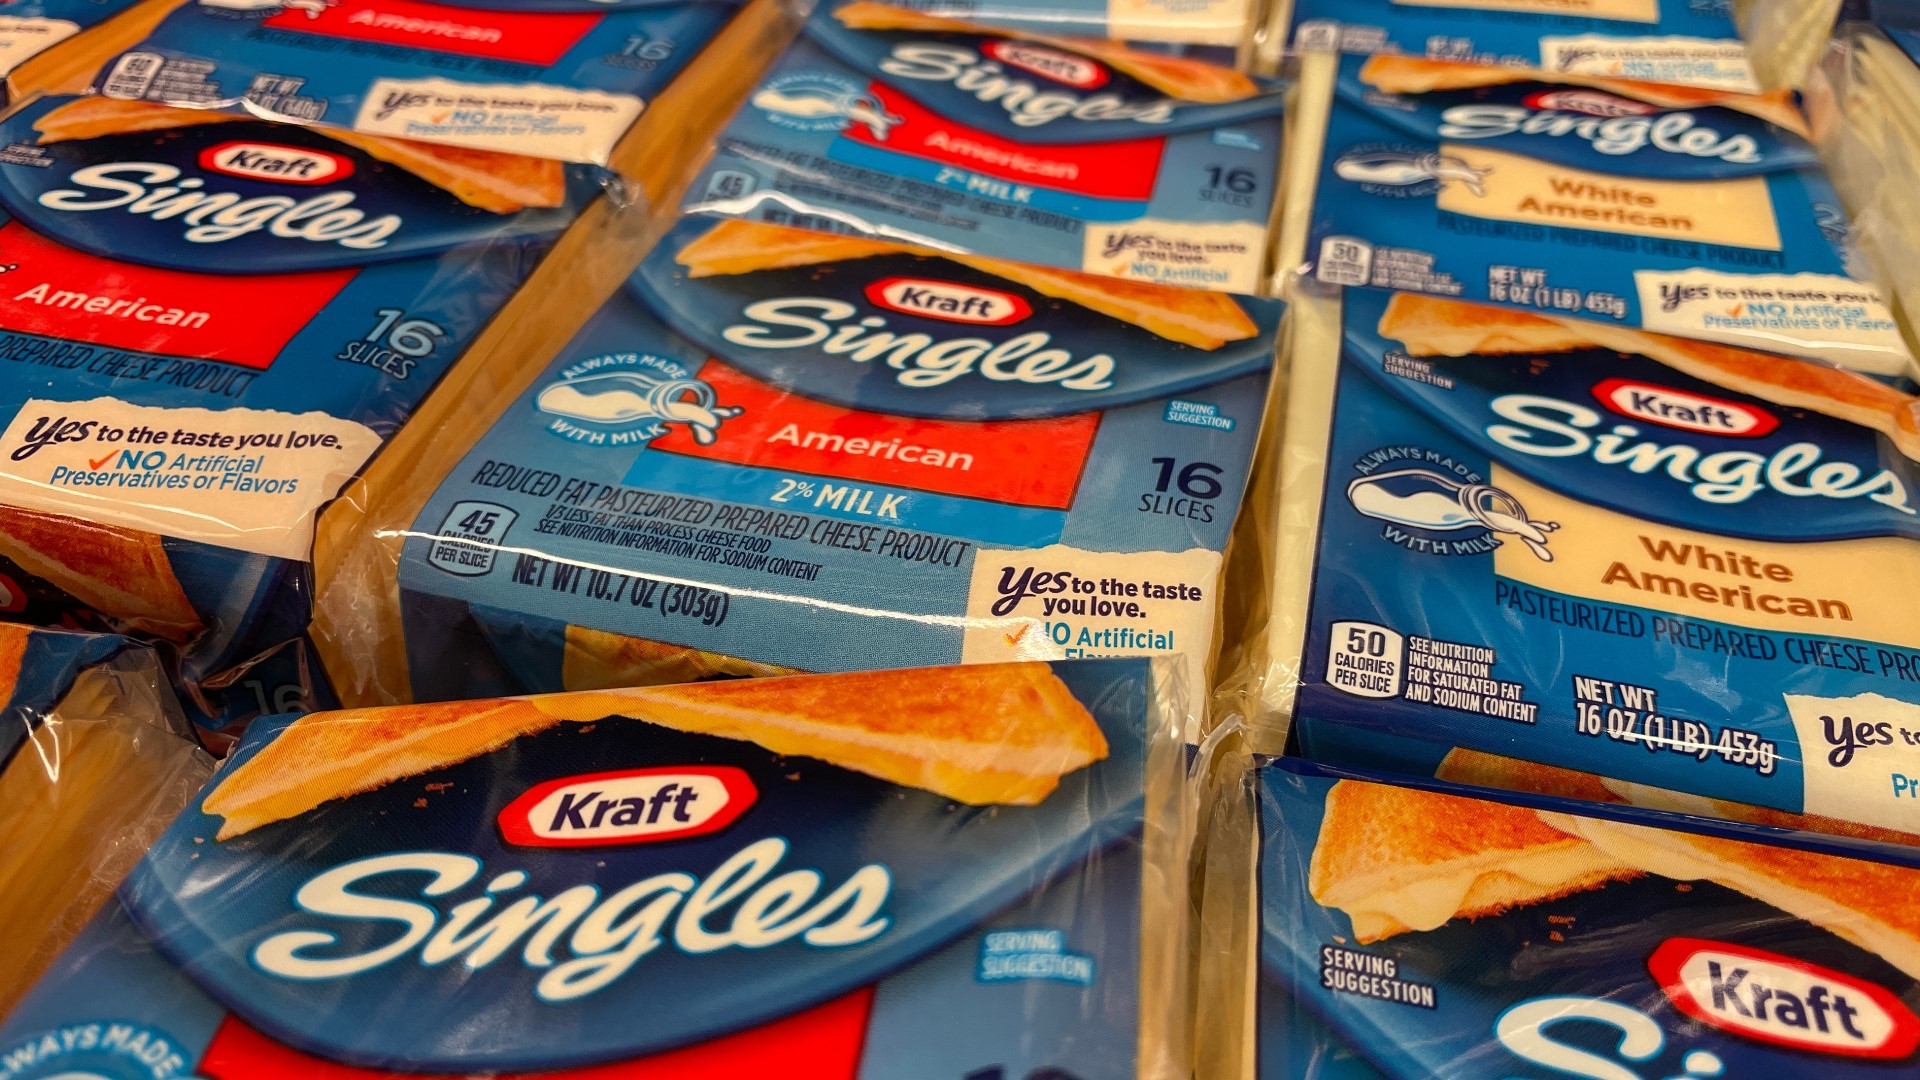 Recall issued for Kraft singles cheese slices over plastic films